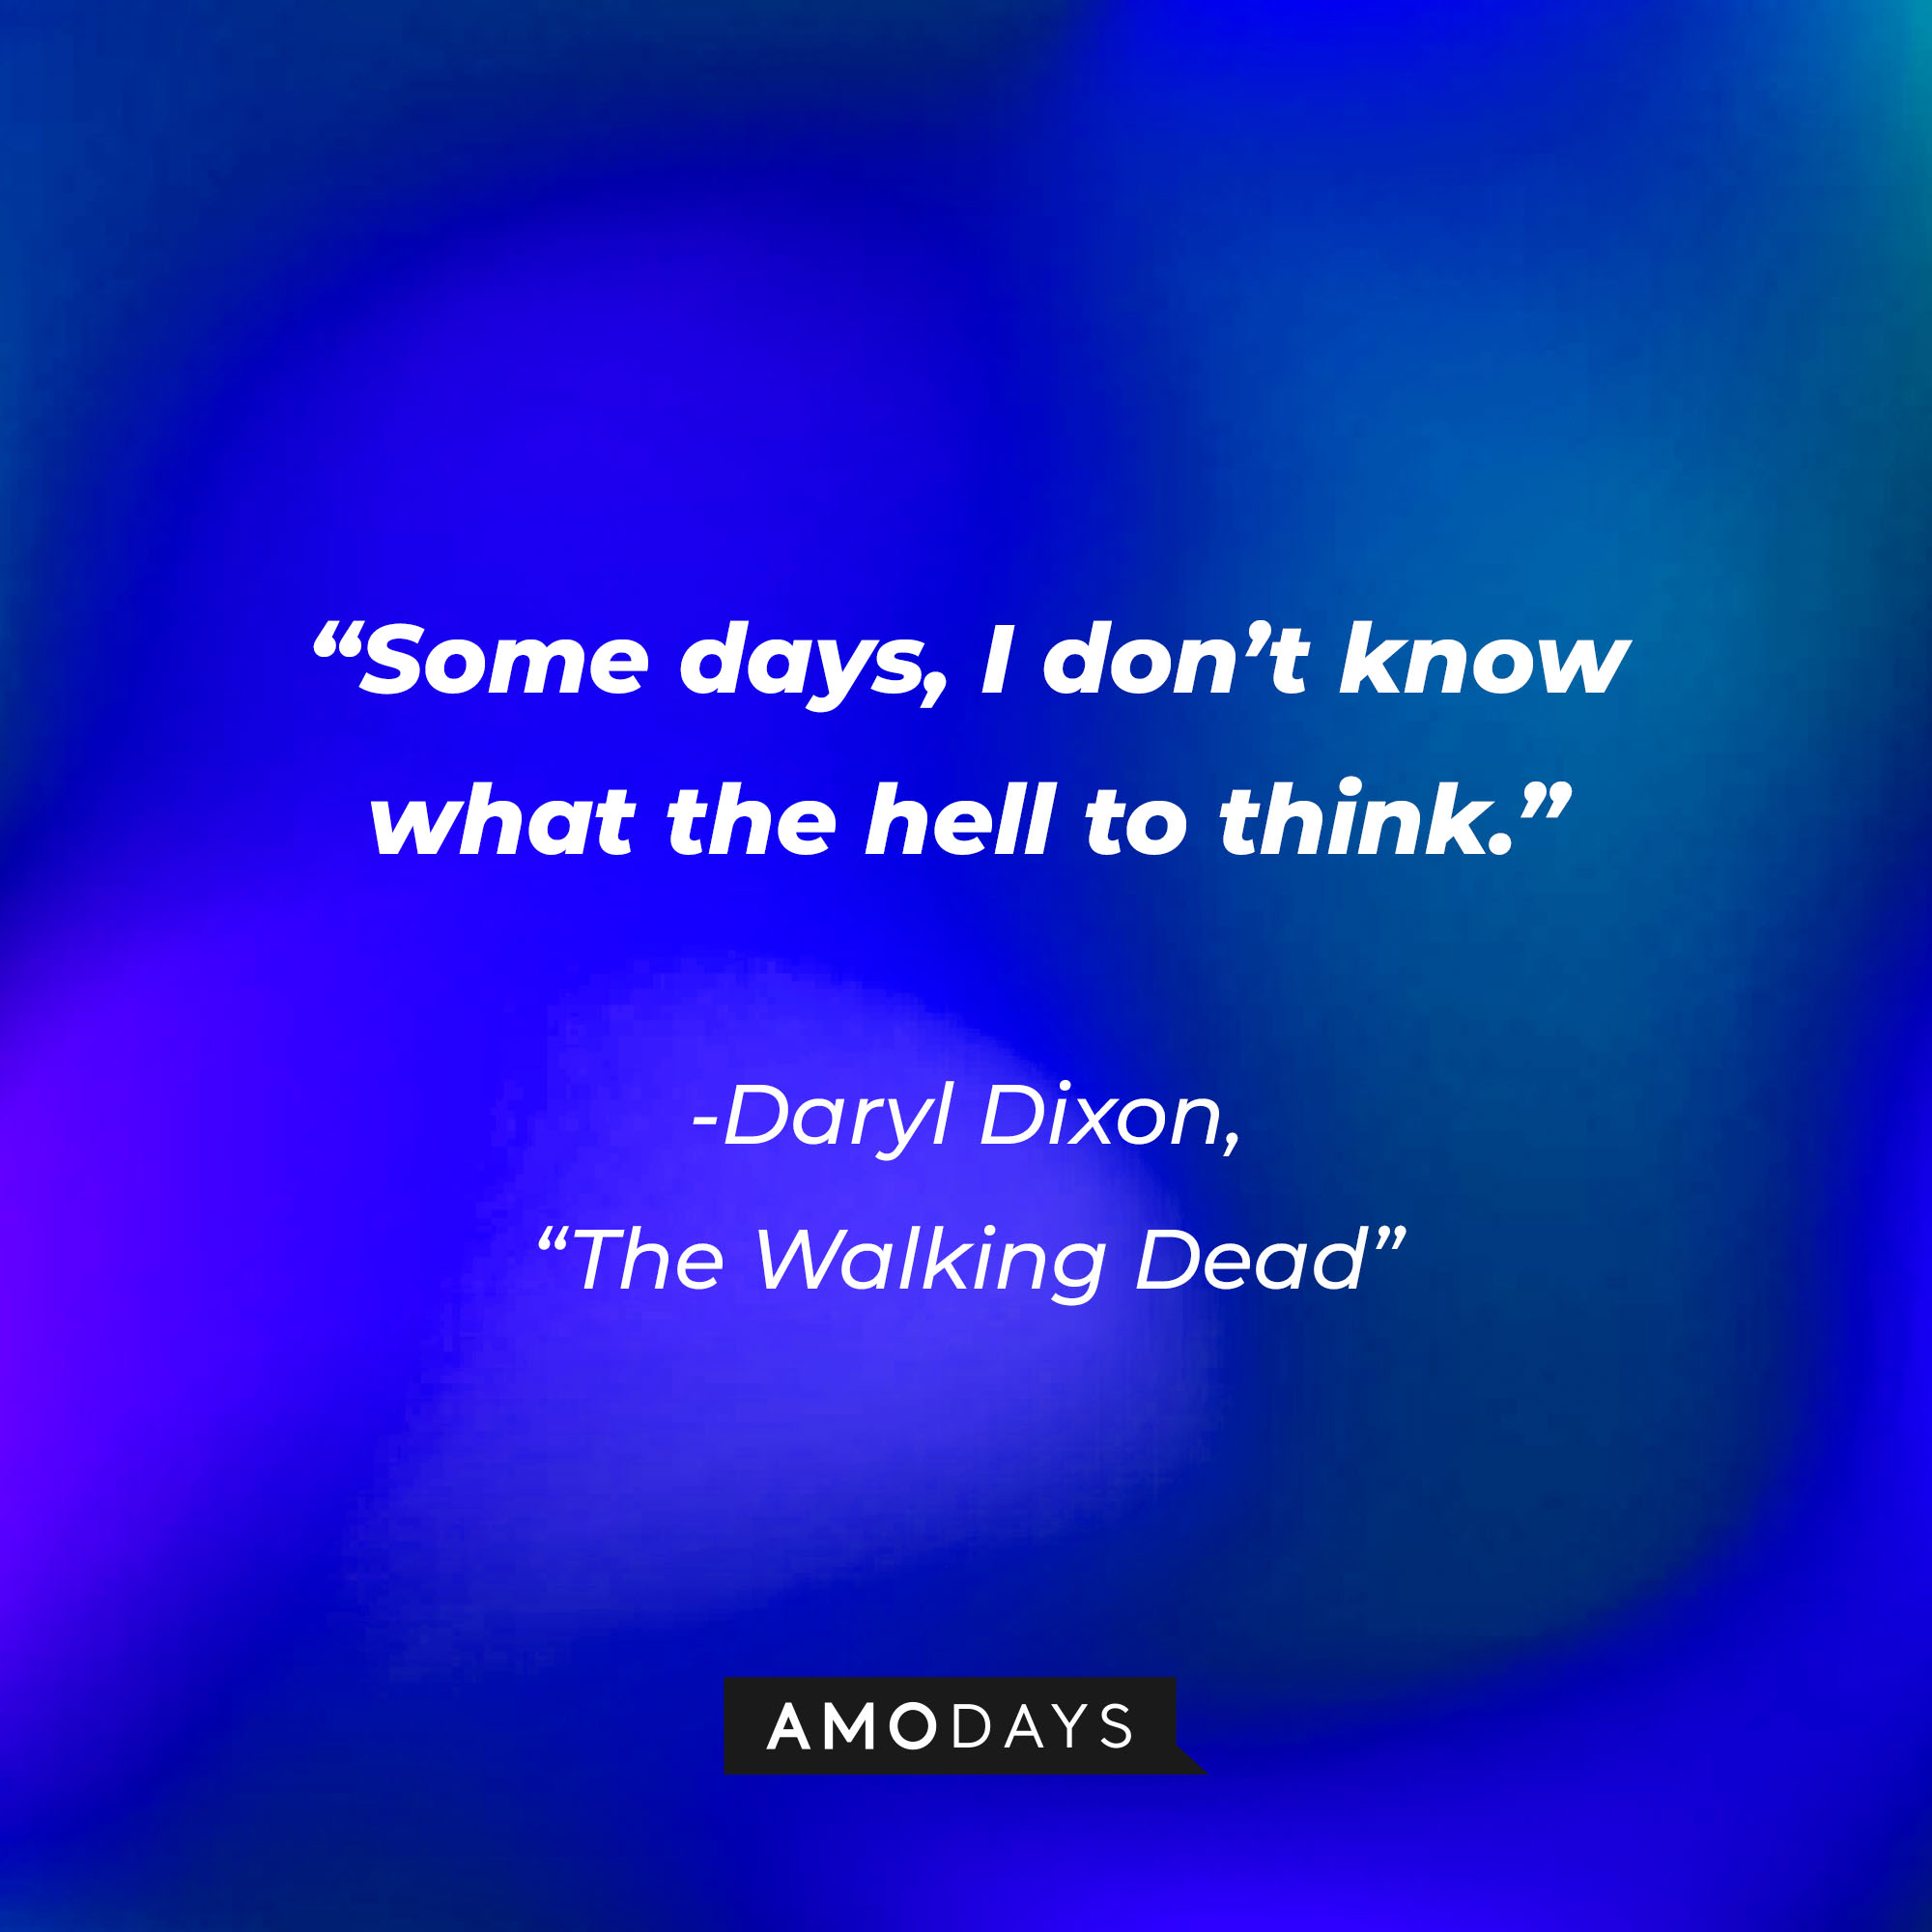 Daryl Dixon’s quote from “The Walking Dead”: “Some days, I don’t know what the hell to think.” | Source: AmoDays